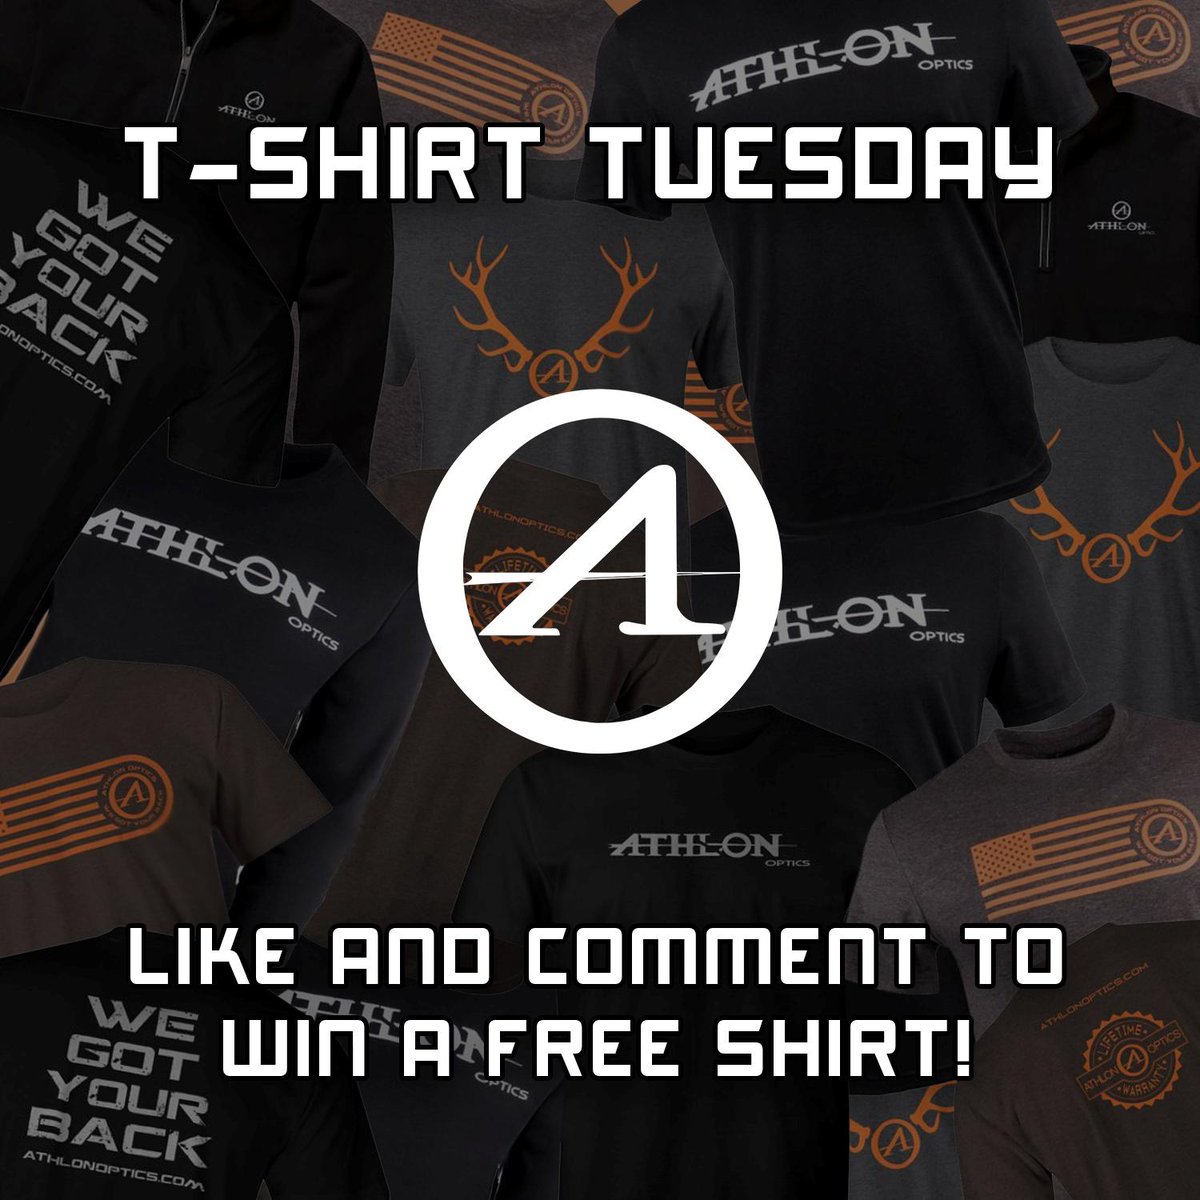 We're in a giveaway kind of mood today. Go check out our Facebook page today and enter for your chance to win a free T-Shirt! facebook.com/athlonoptics/